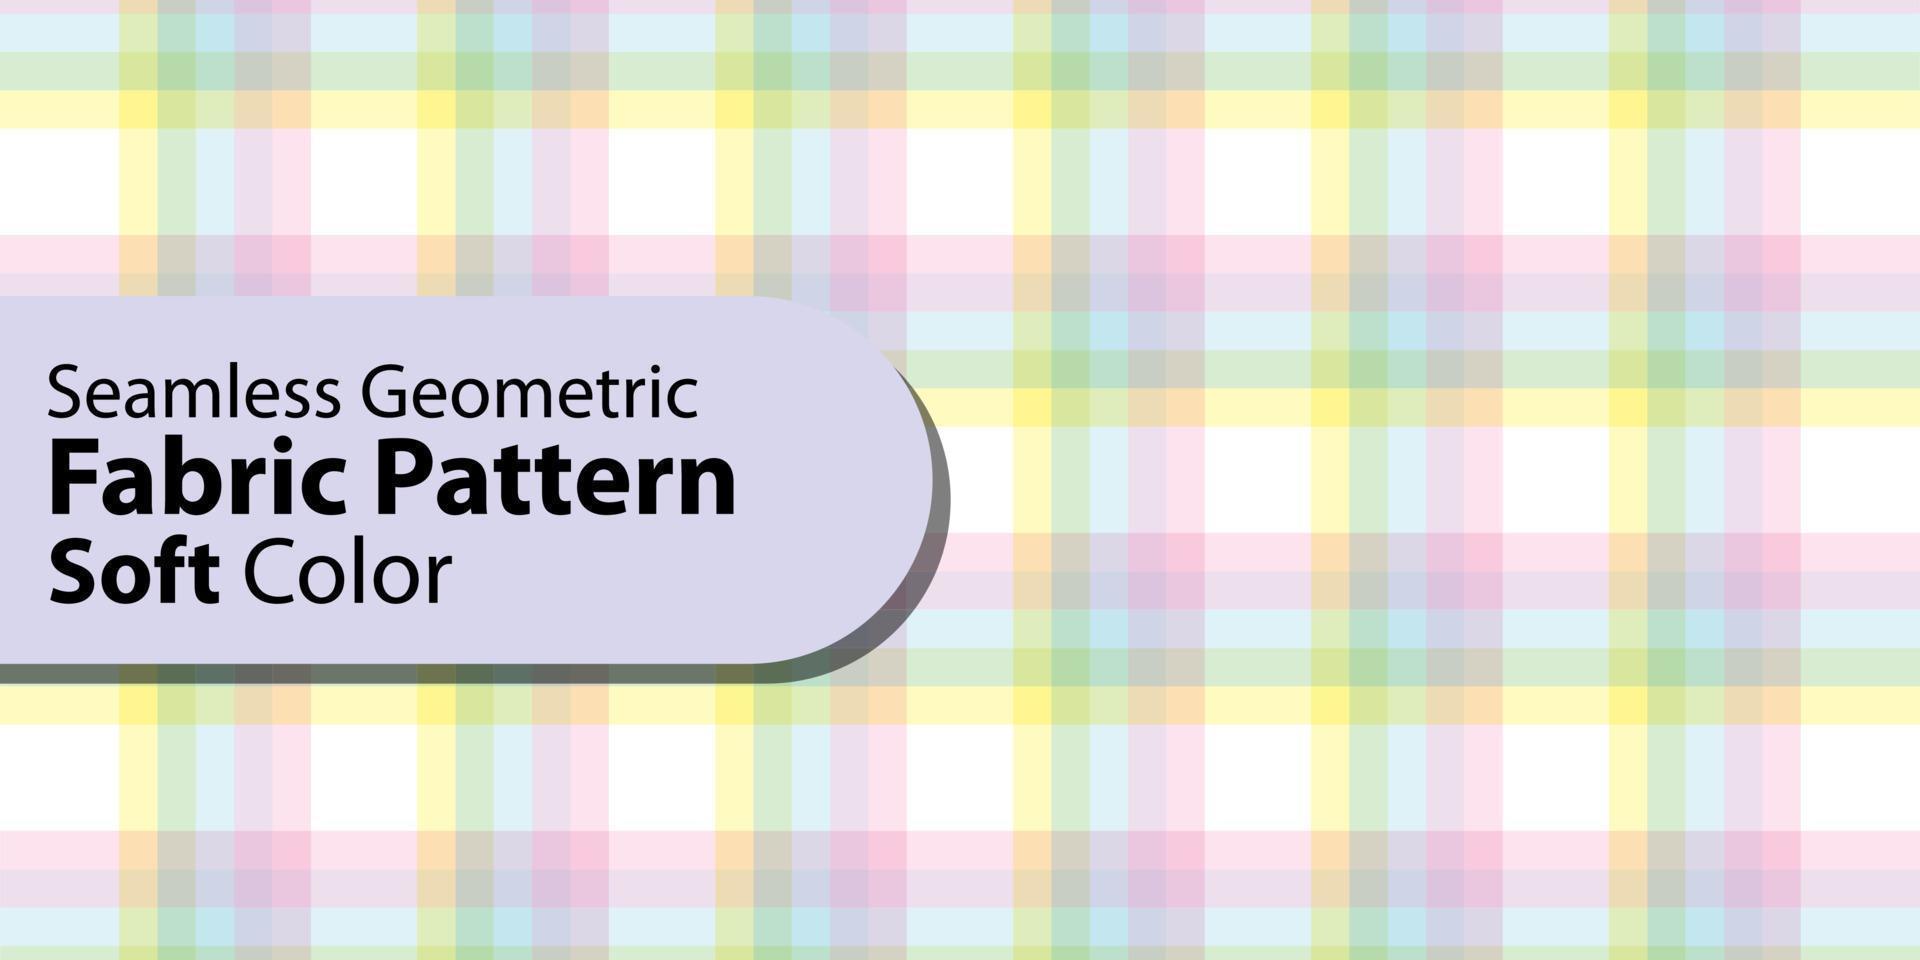 Seamless Geometric Fabric Pattern-Soft Color vector